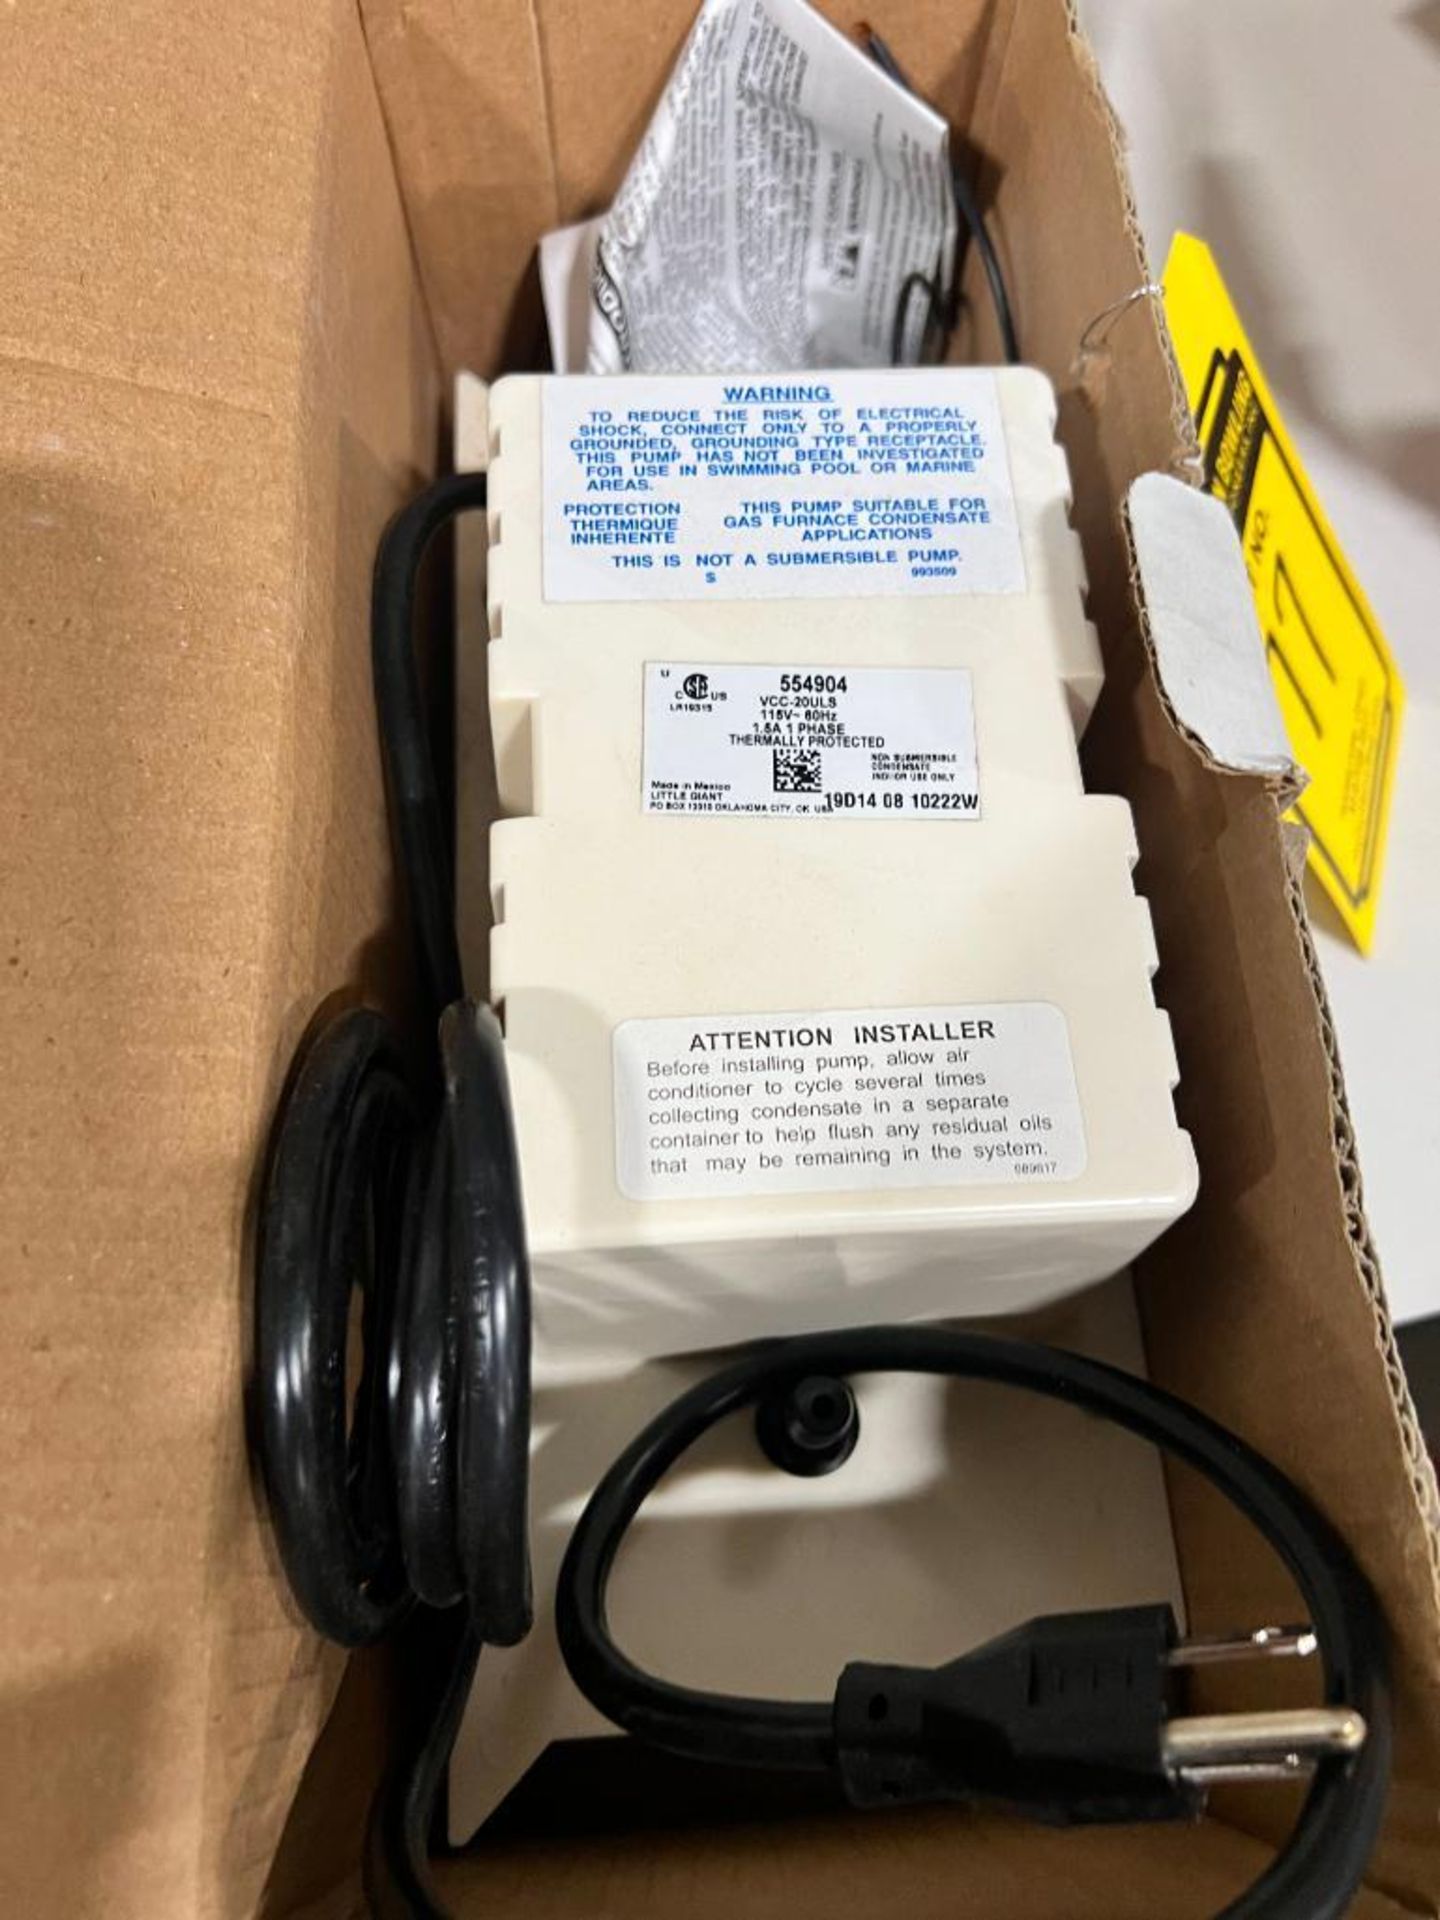 (New) Little Giant Condensate, Model VCC205